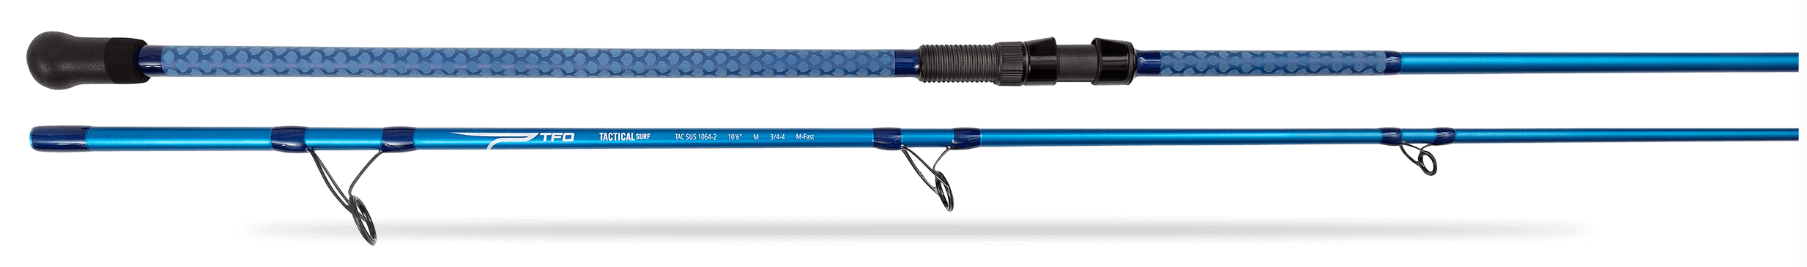  Taigek Surf Spinning Fishing Rod, Fast Action